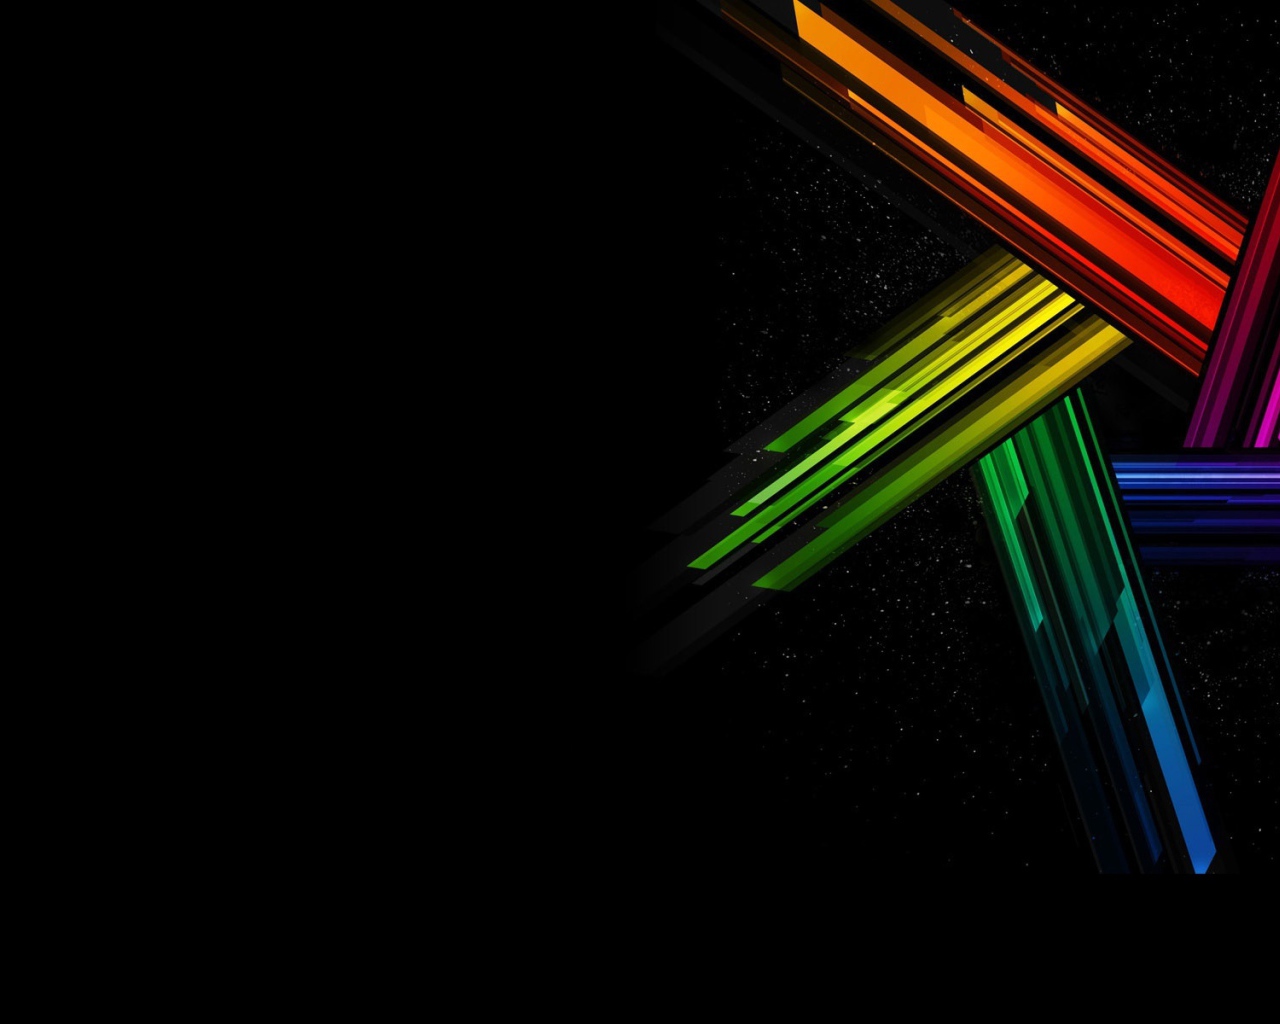 Black wallpaper with rainbow abstraction